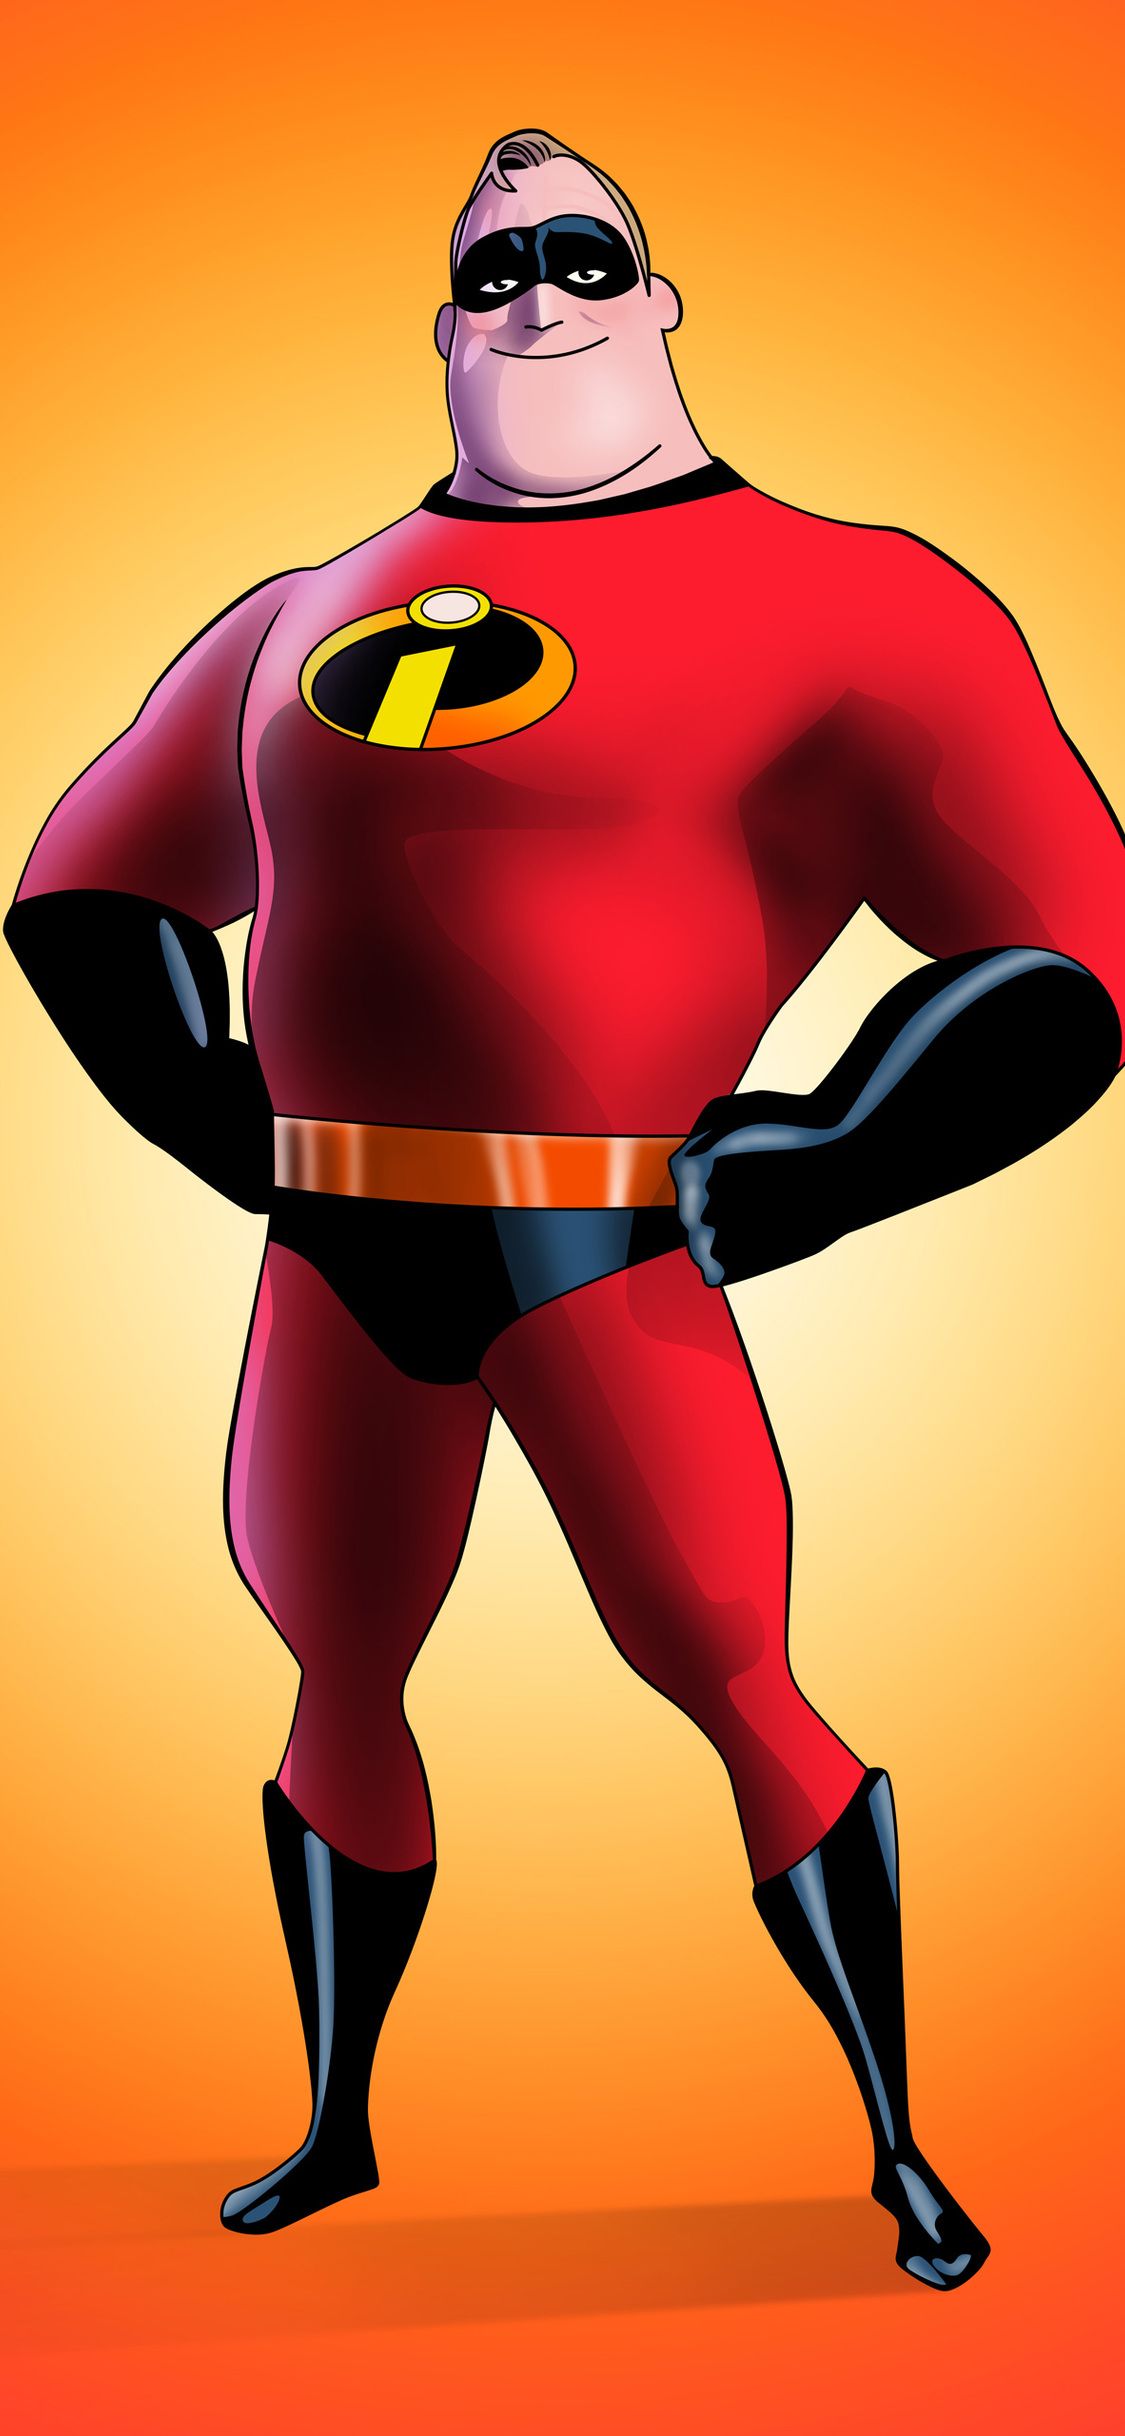 Mr Incredible In The Incredibles 2 2018 Artwork 5k iPhone XS, iPhone iPhone X HD 4k Wallpaper, Image, Background, Photo and Picture